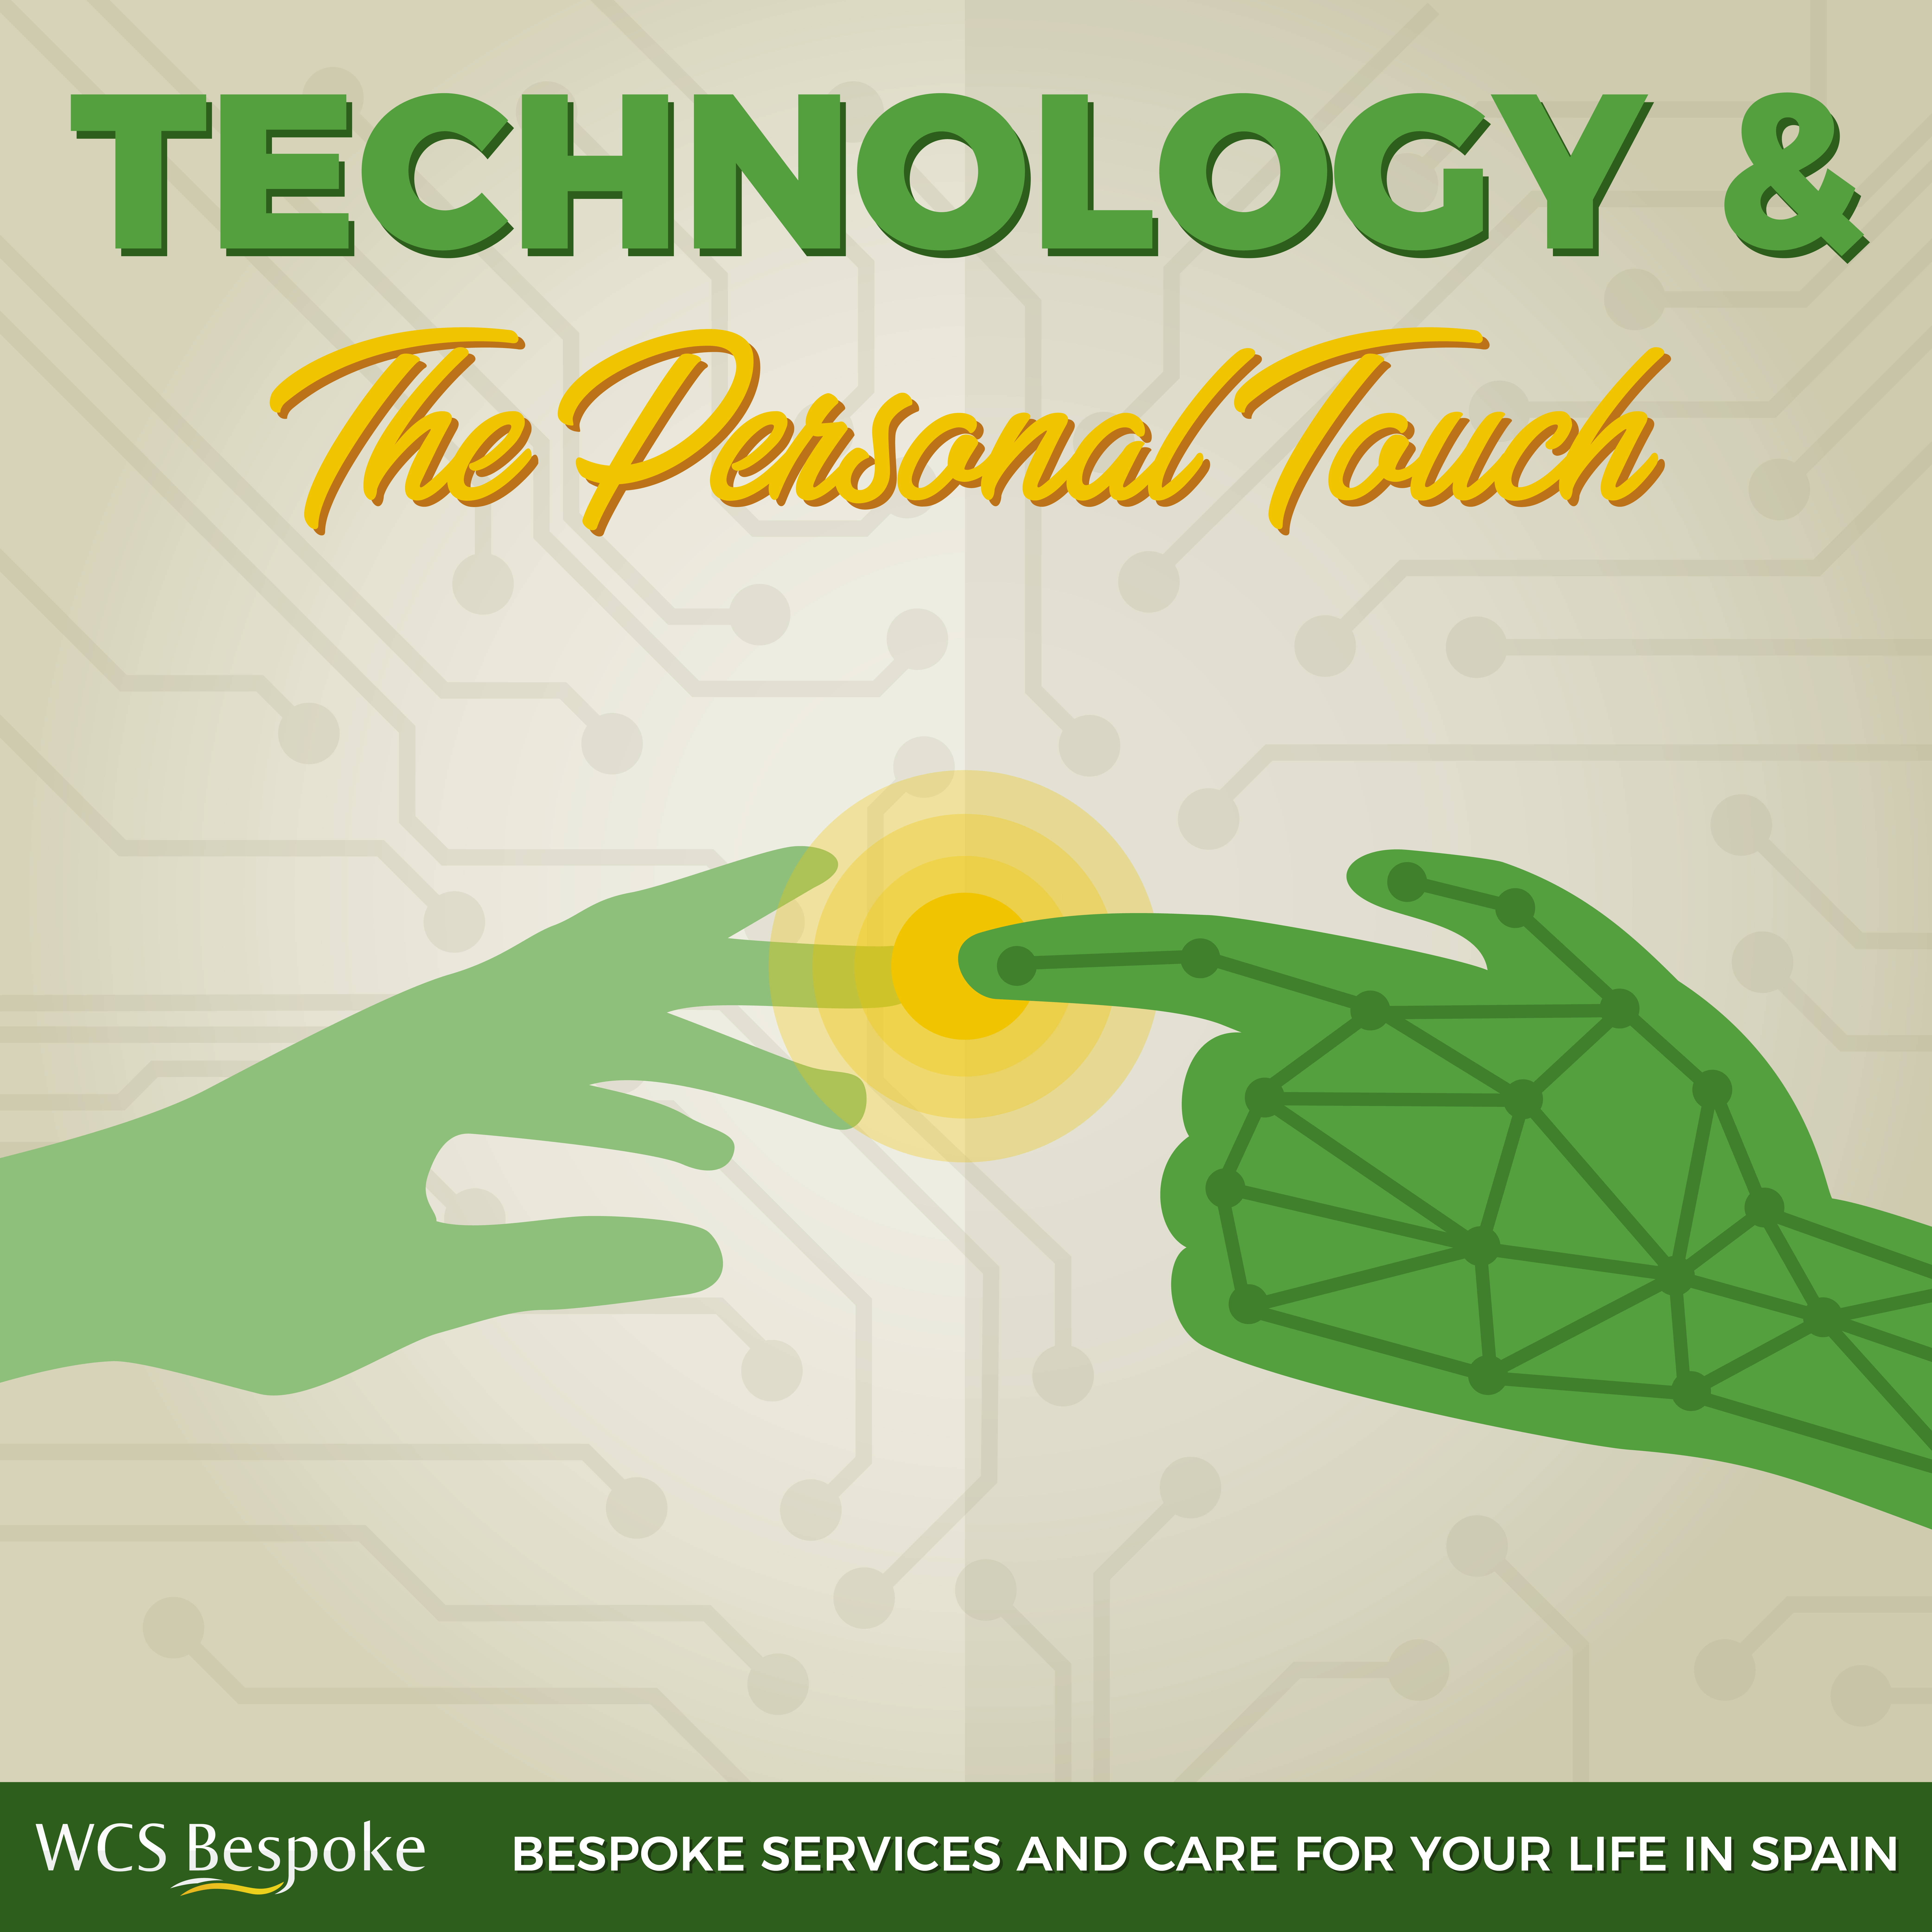 Technology & the Personal Touch